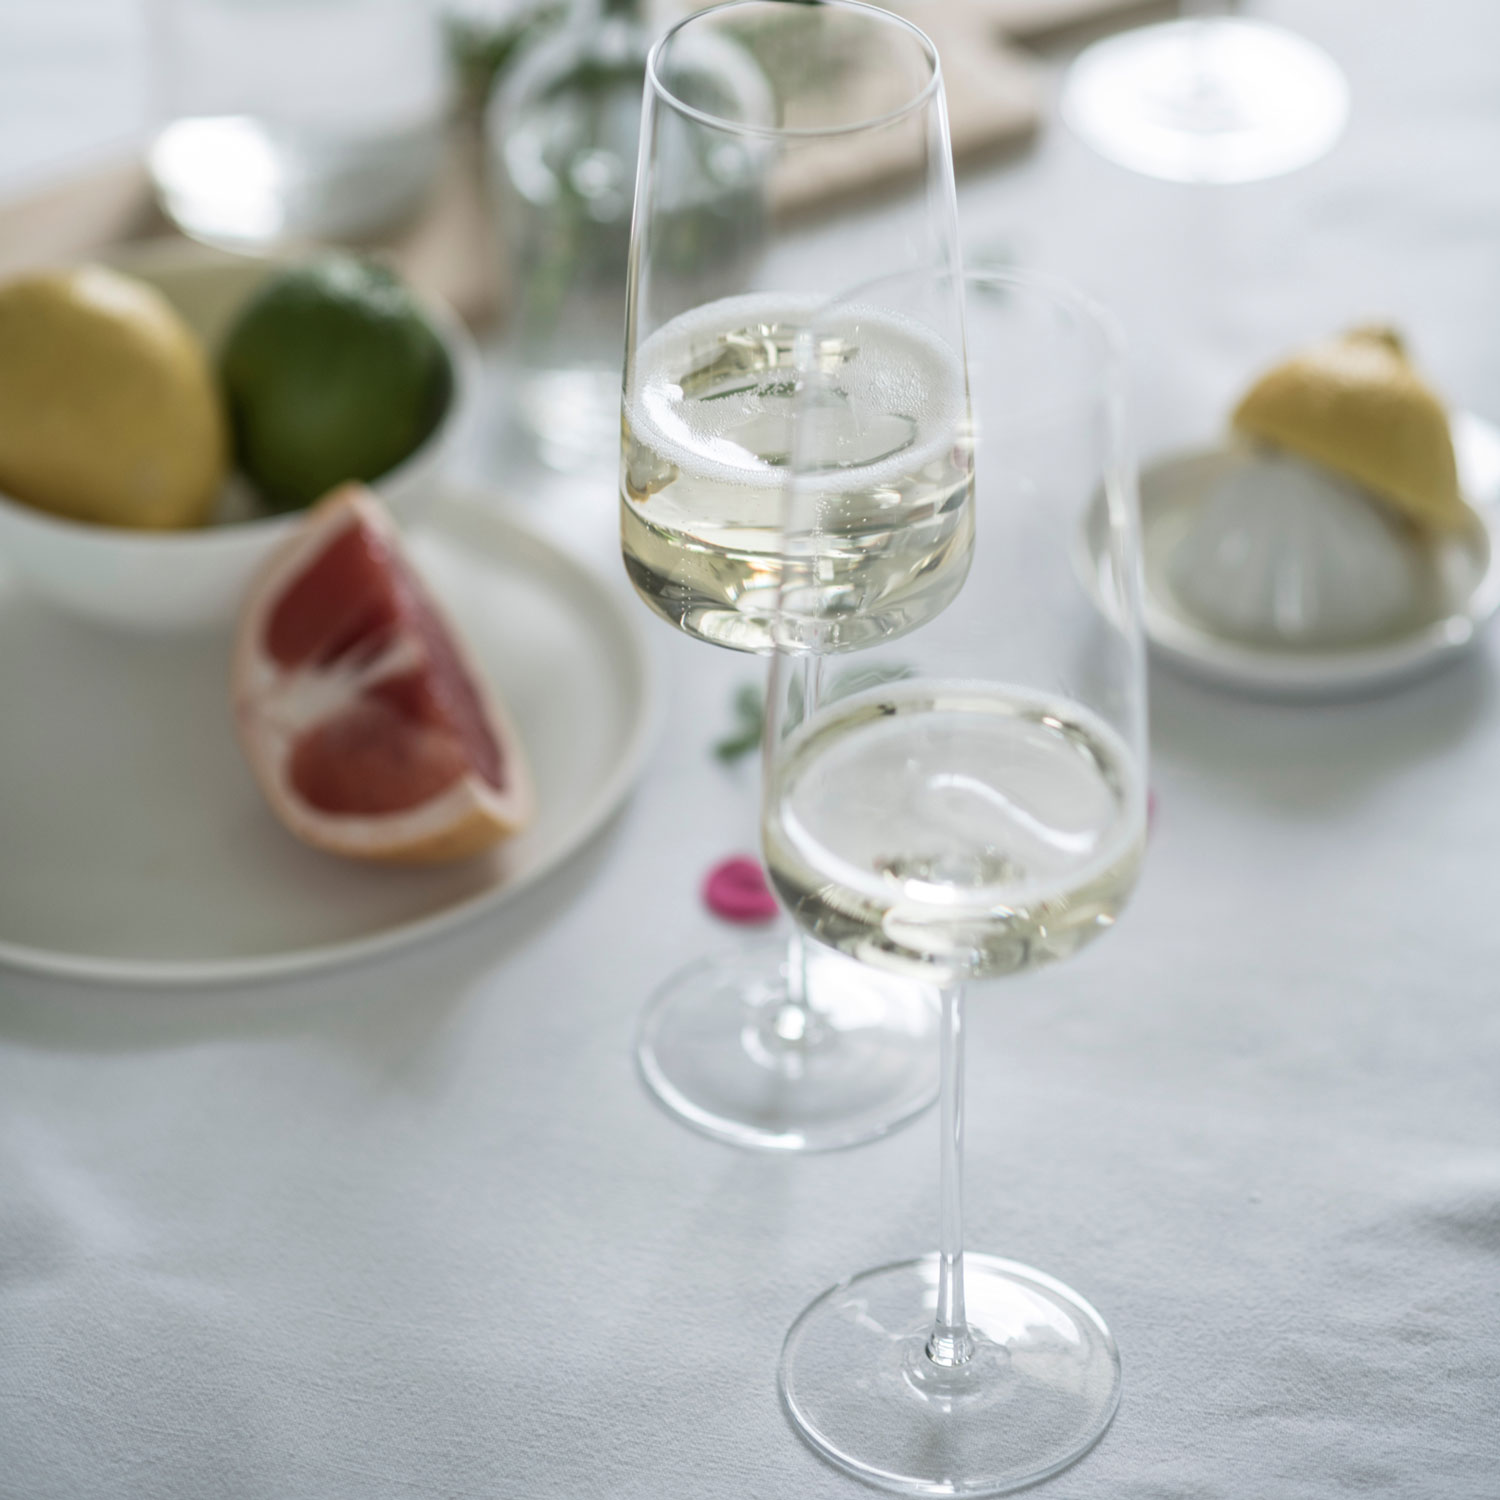 Simplify Flavoursome & Spicy Wine Glass 69 cl, 2-pack - Zwiesel @  RoyalDesign